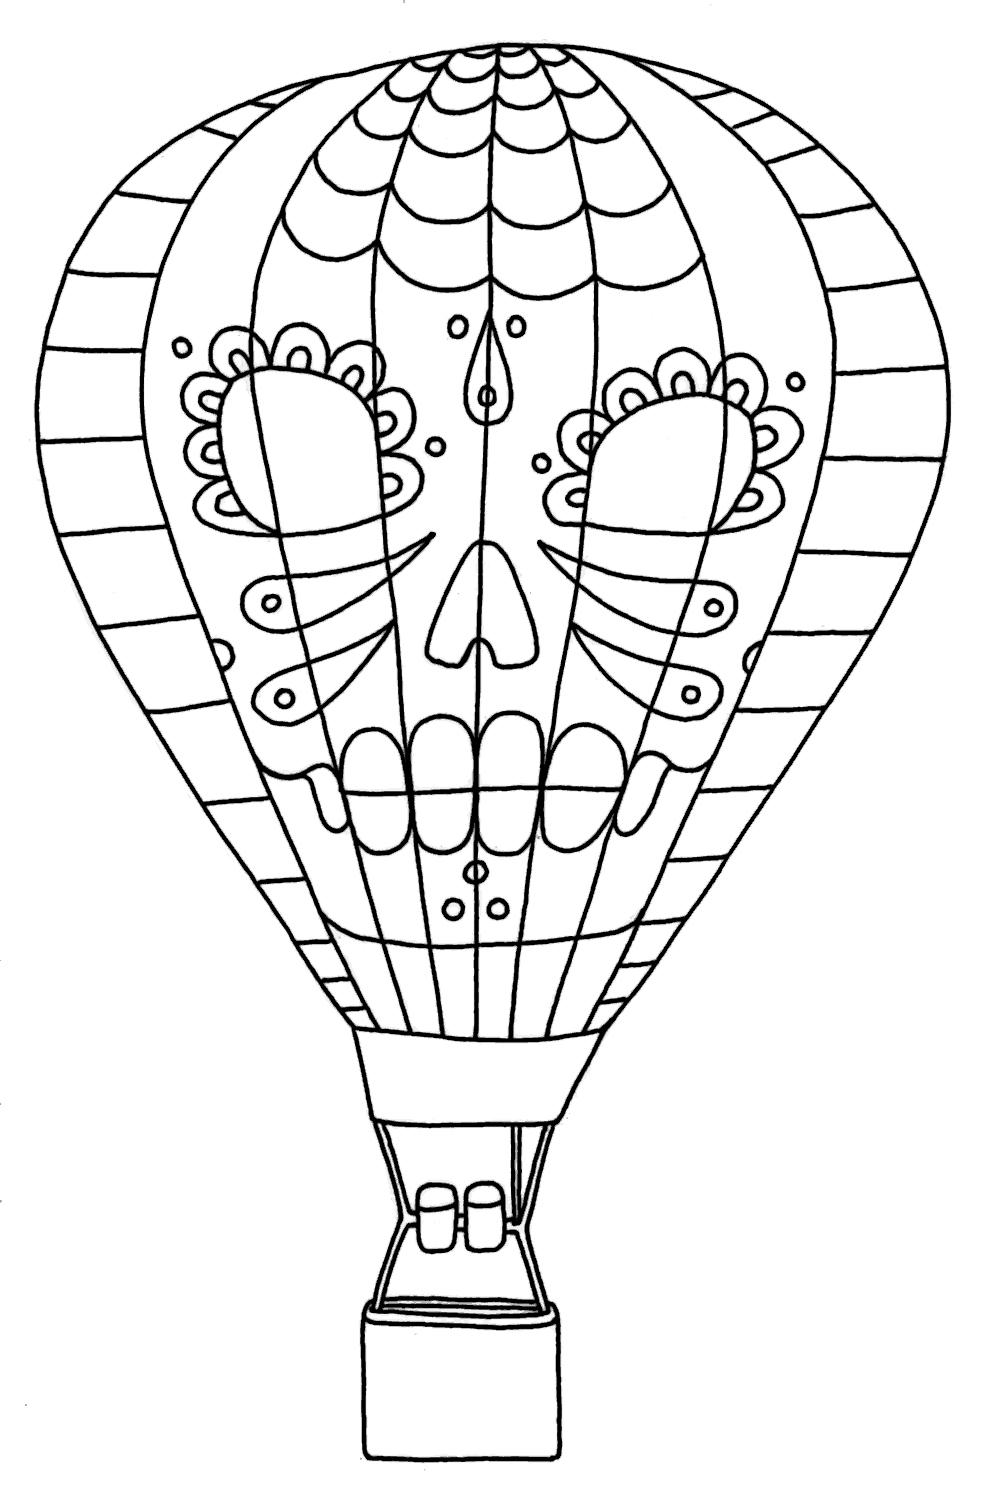 swiss-rolex-replica-2-balloon-coloring-pages-for-kids